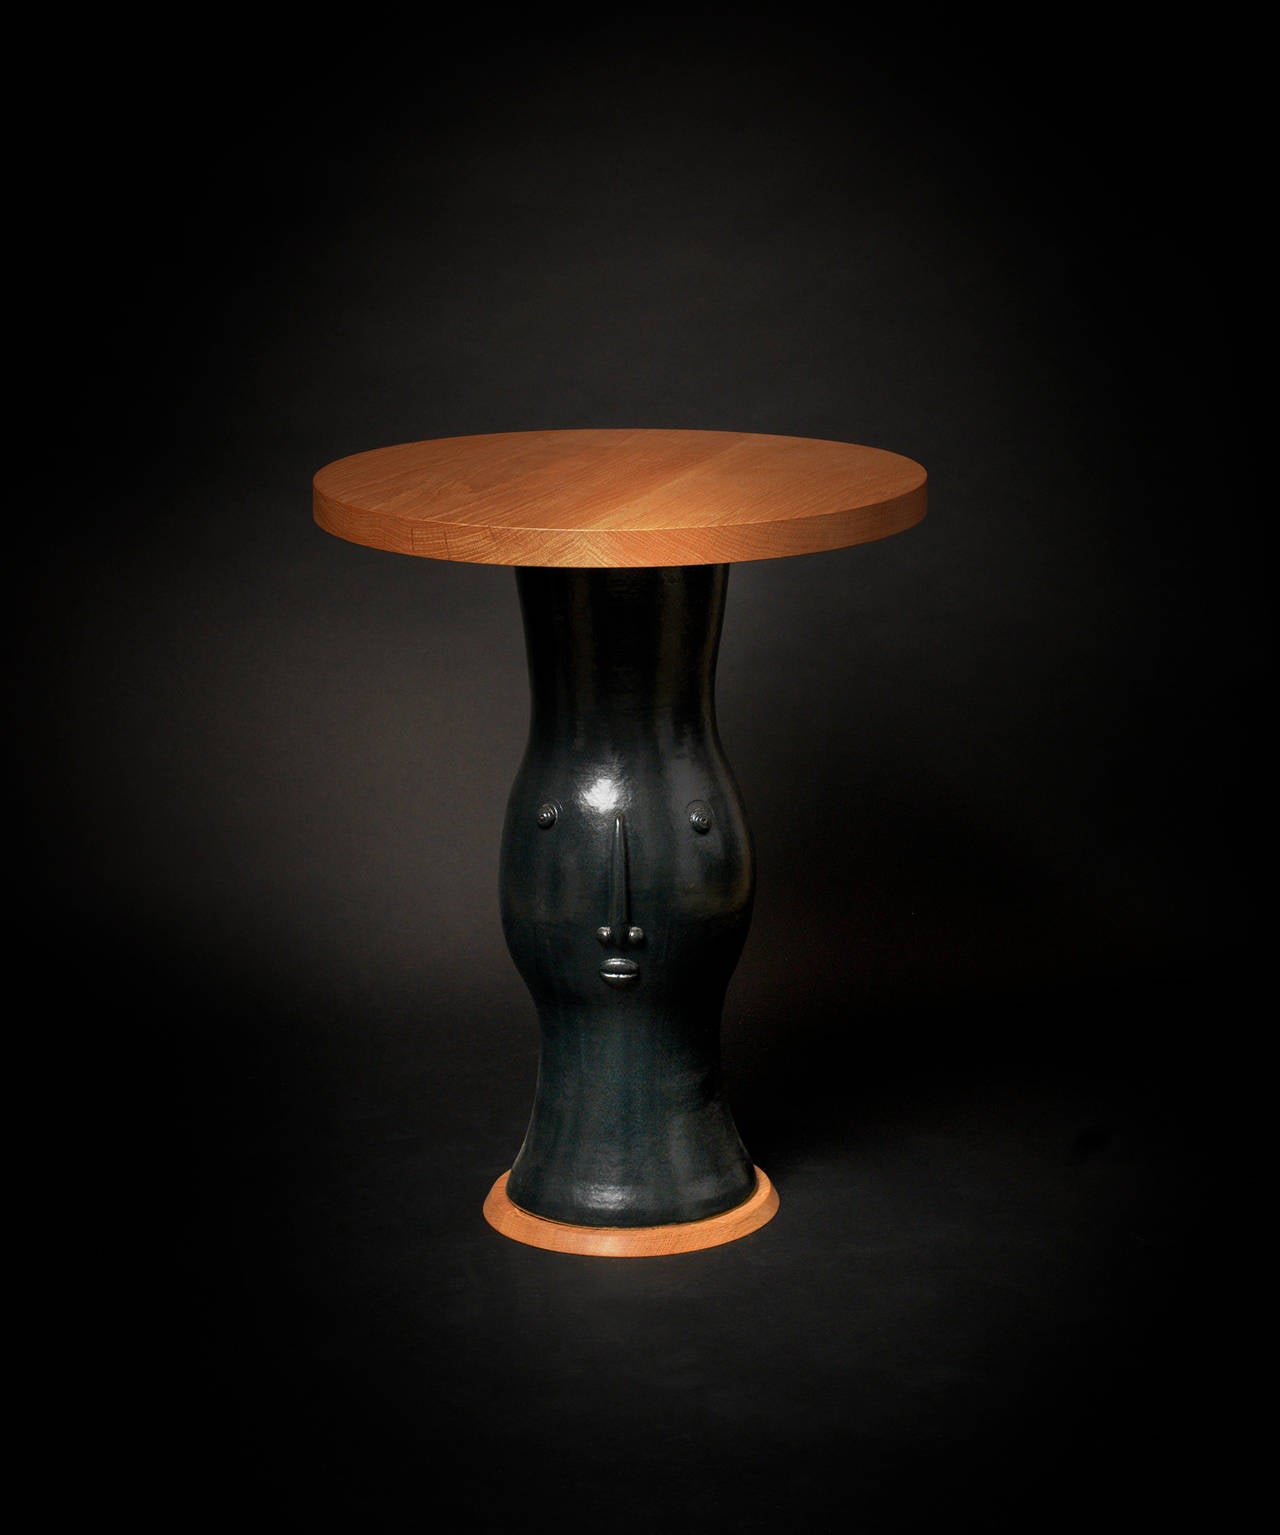 French Ceramic and Oak Gueridon Table by DaLo